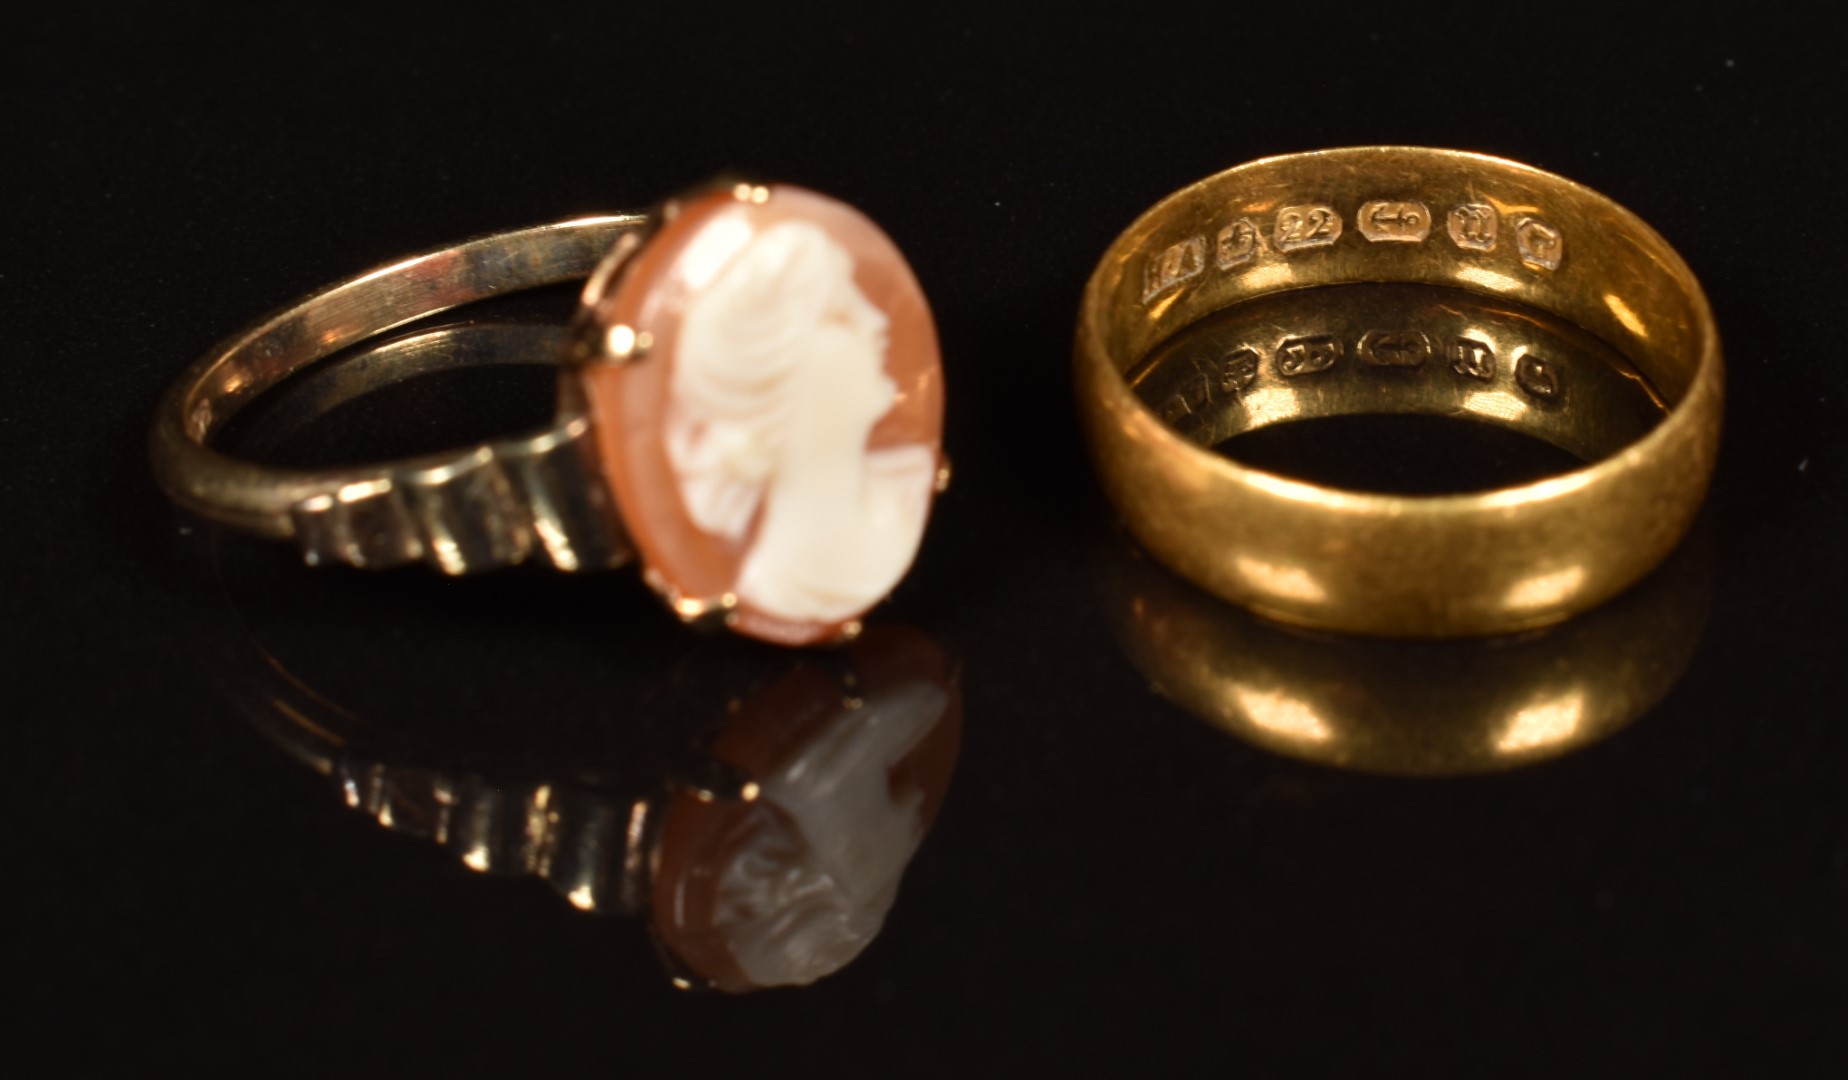 A 22ct gold wedding band / ring (3.1g, size K) in vintage box for Kendal & Dent, 106 Cheapside, - Image 3 of 4